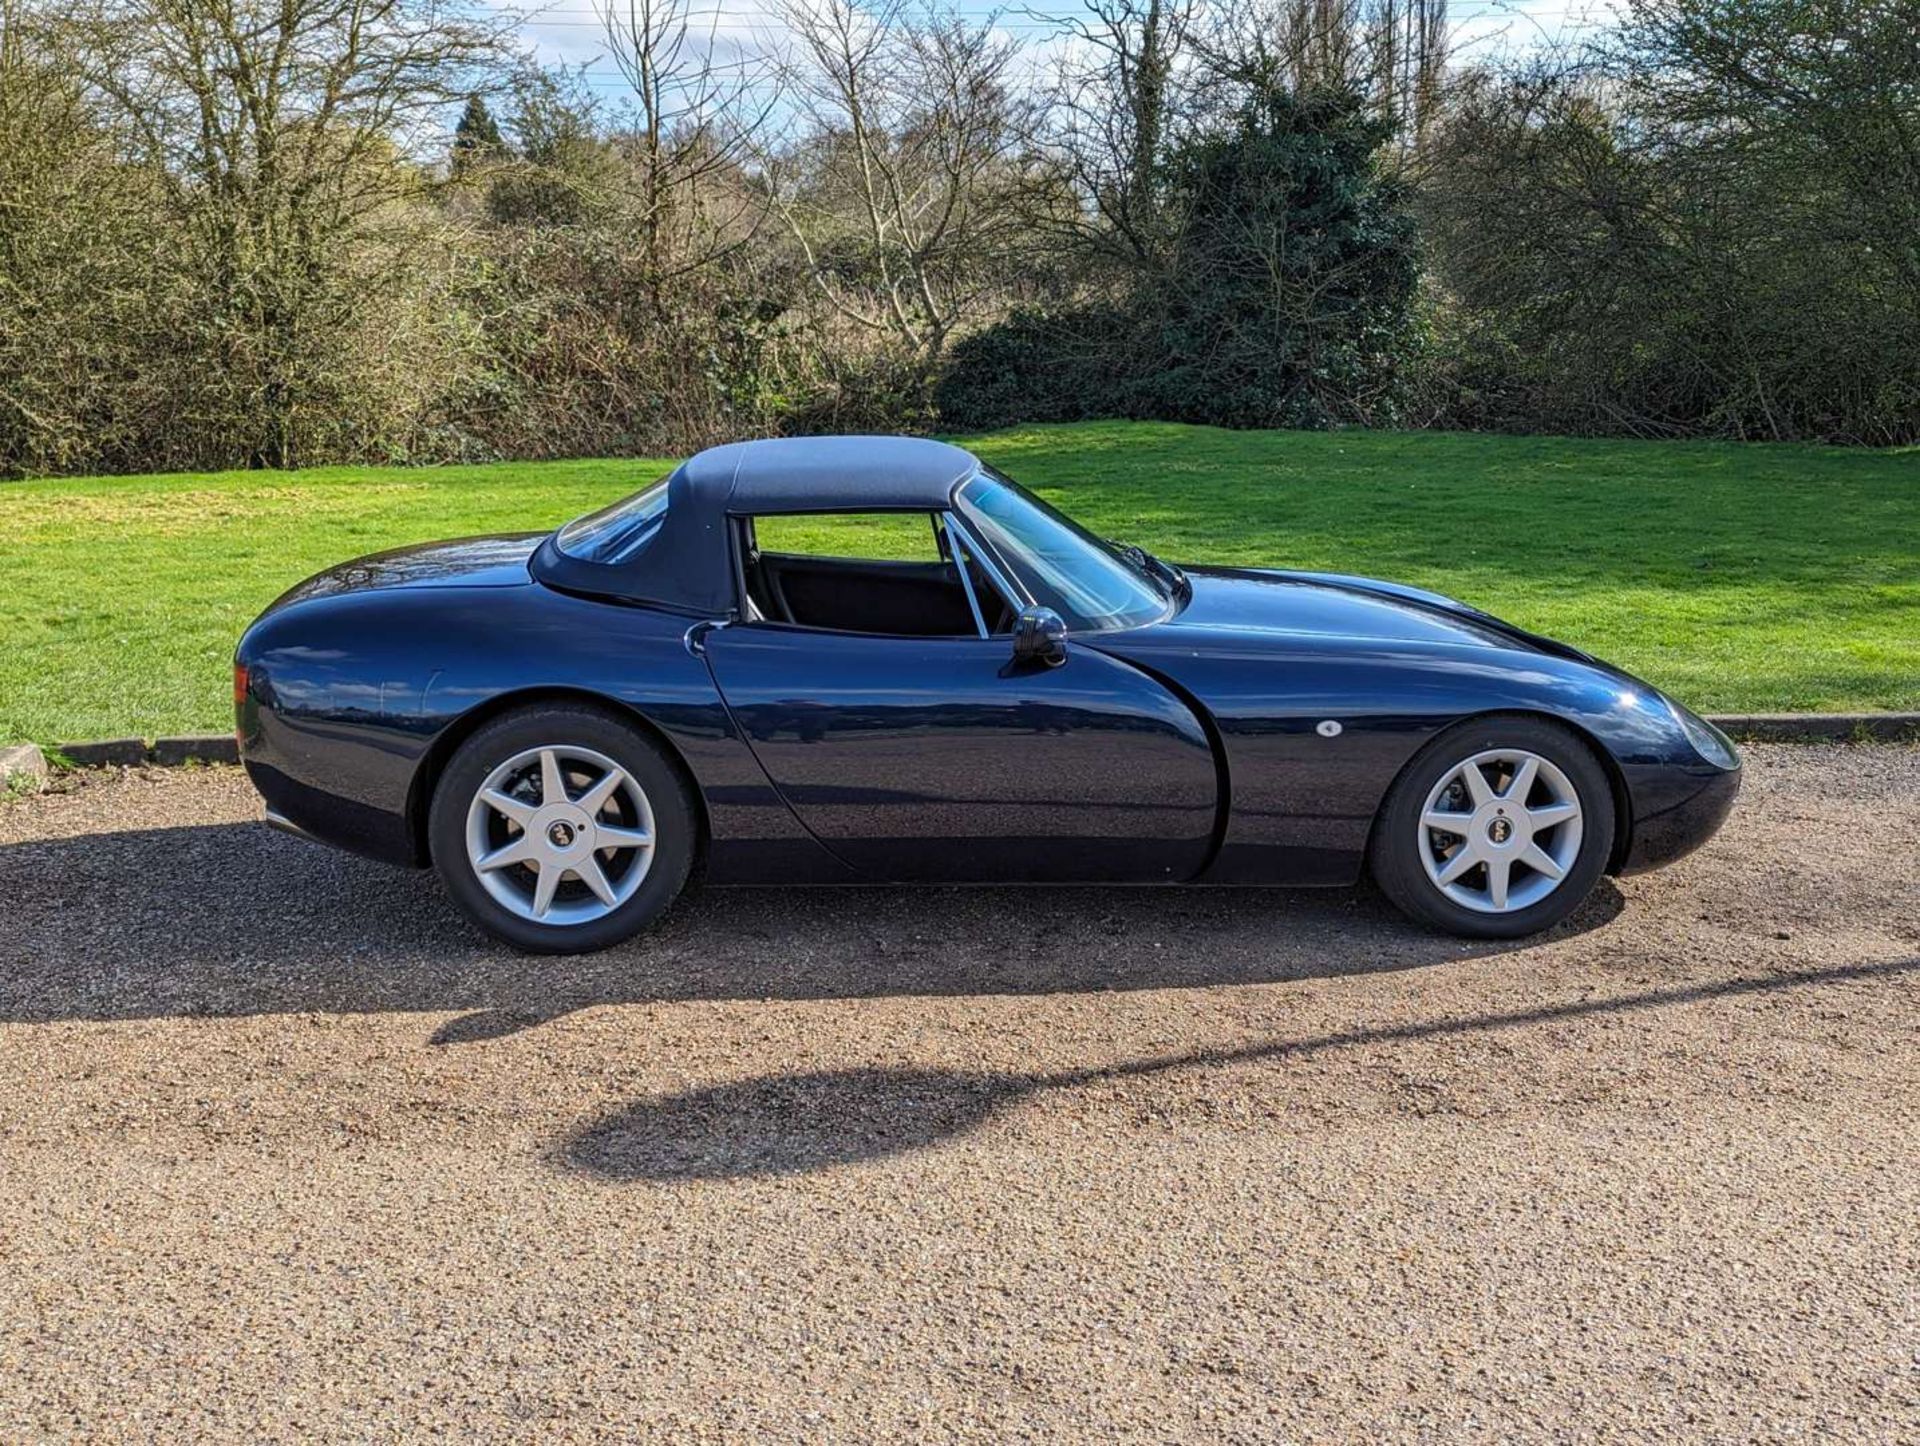 1997 TVR GRIFFITH 5.0 - Image 9 of 29